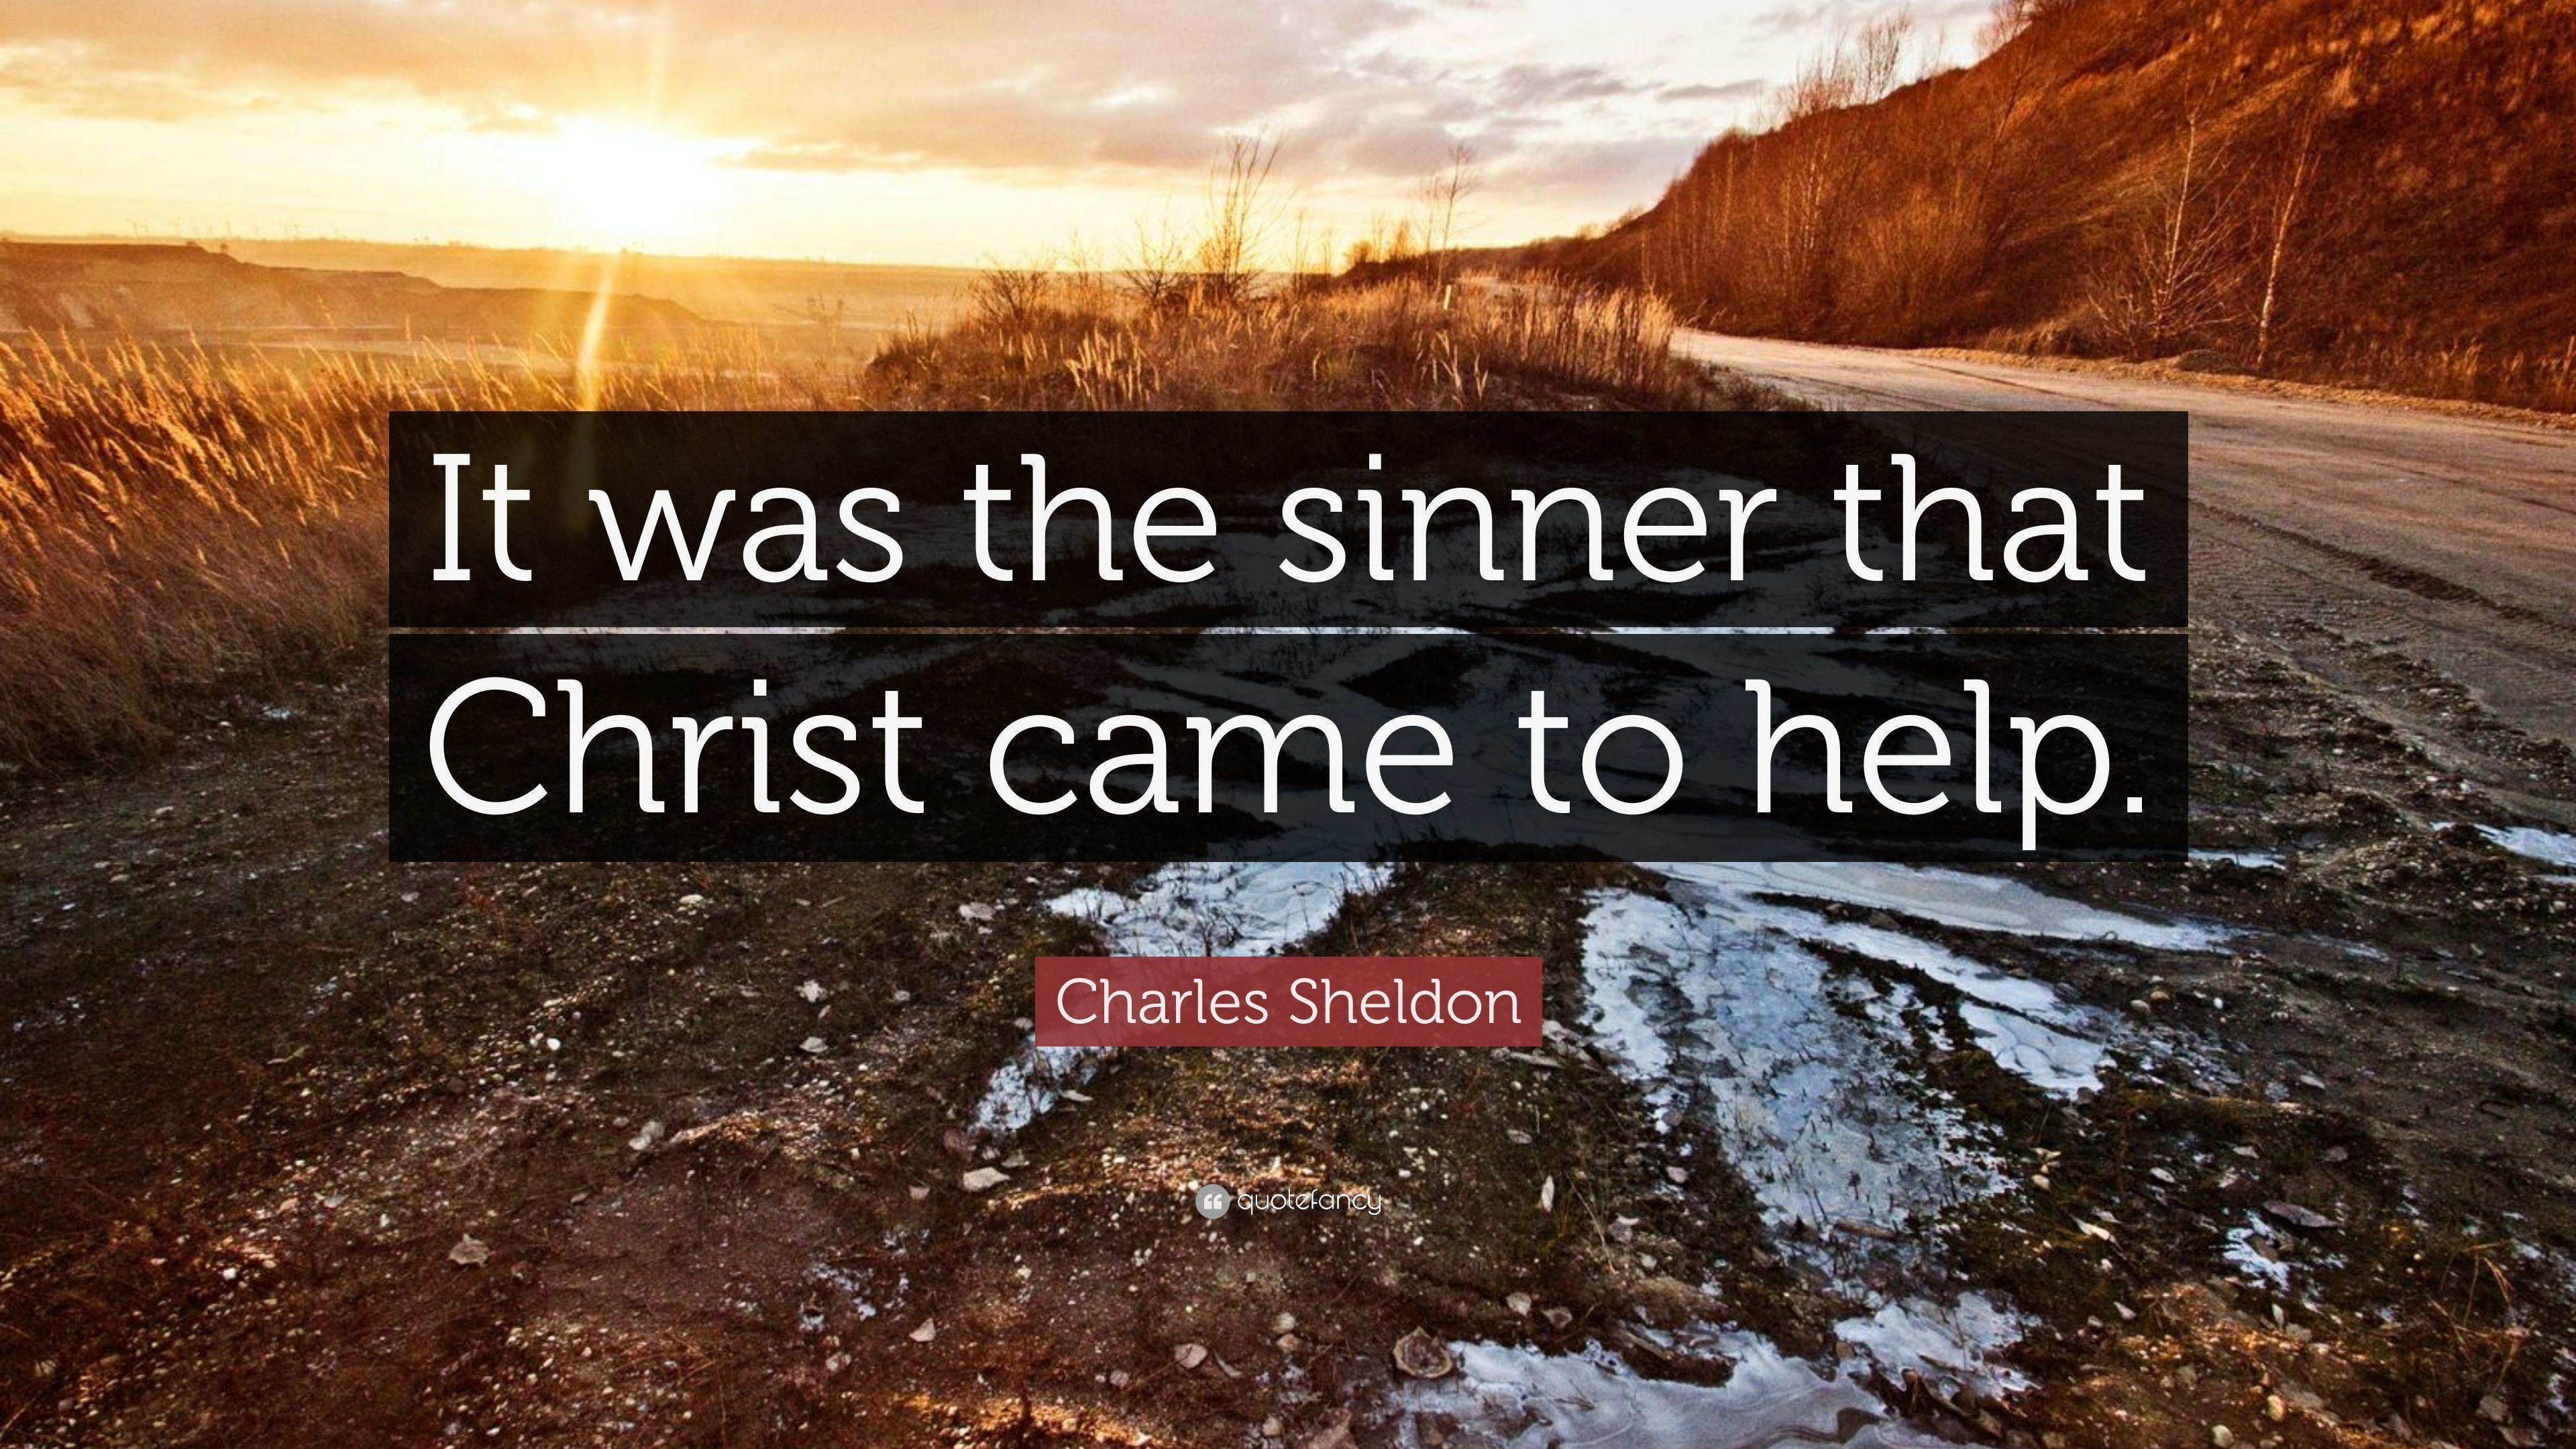 Charles Sheldon Quote: “It was the sinner that Christ came to help